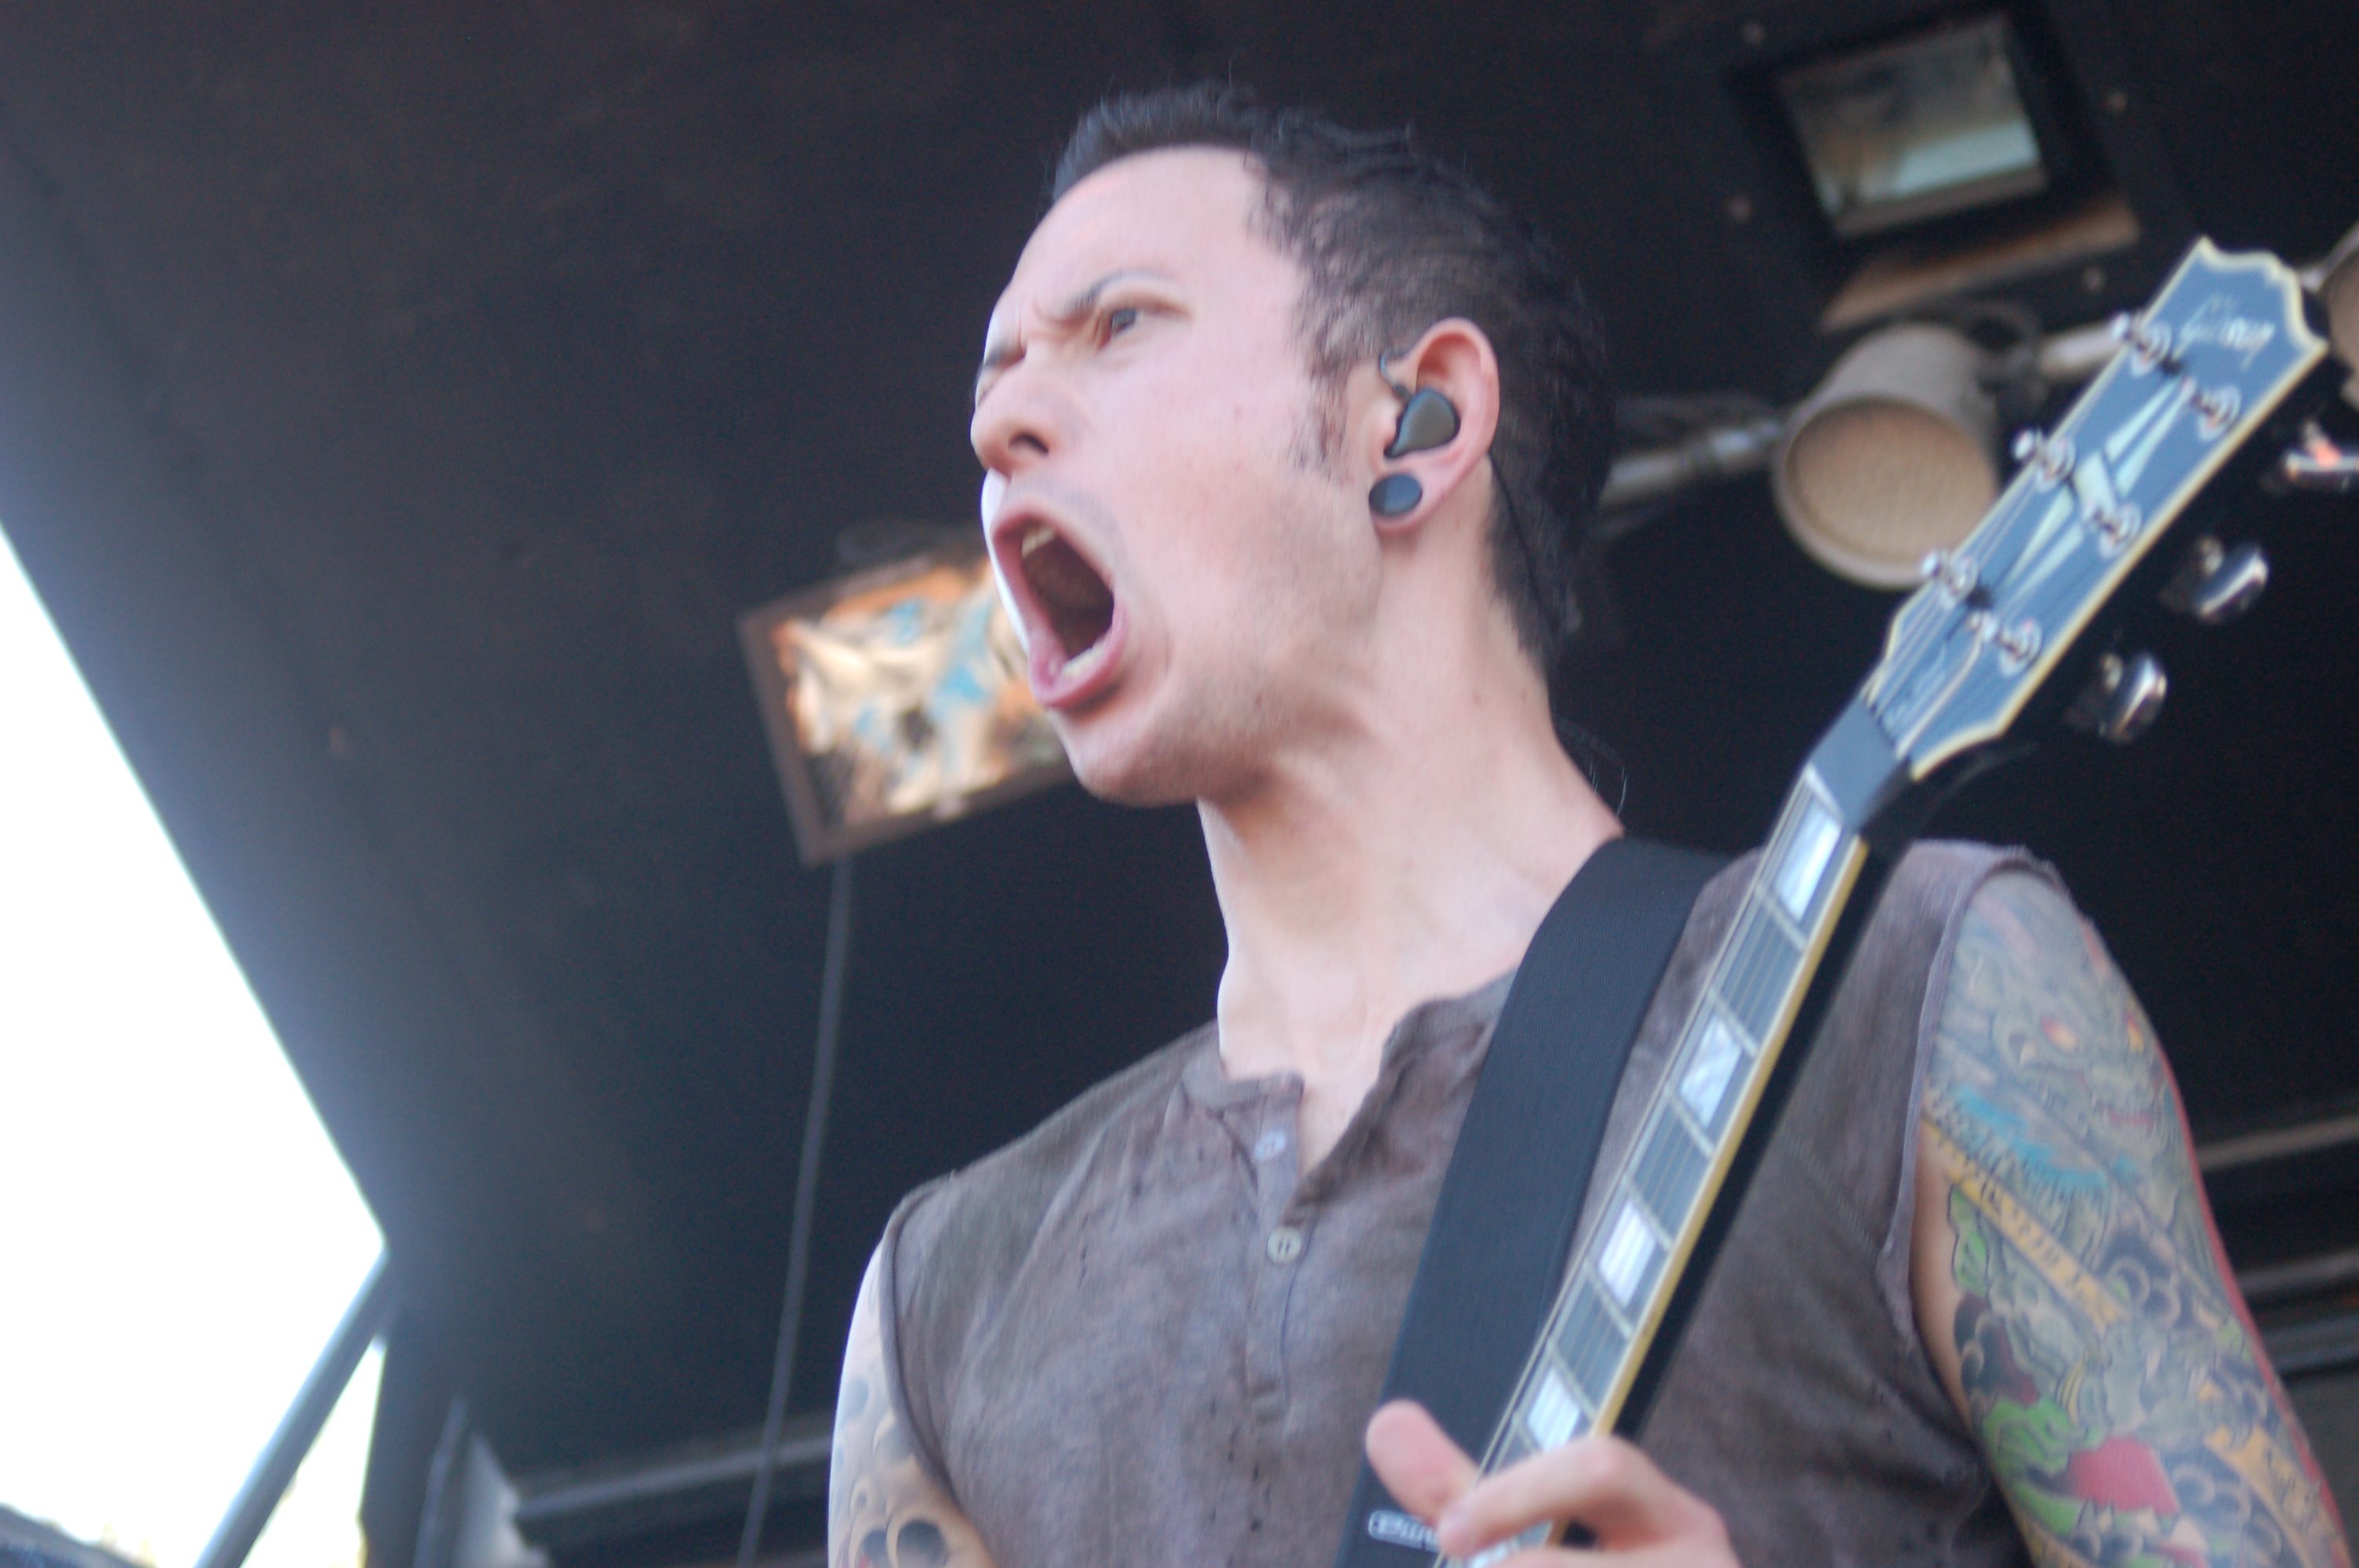 Matt Heafy of Trivium and Mike Shinoda of Linkin Park Join Forces in New Single “In Defiance”